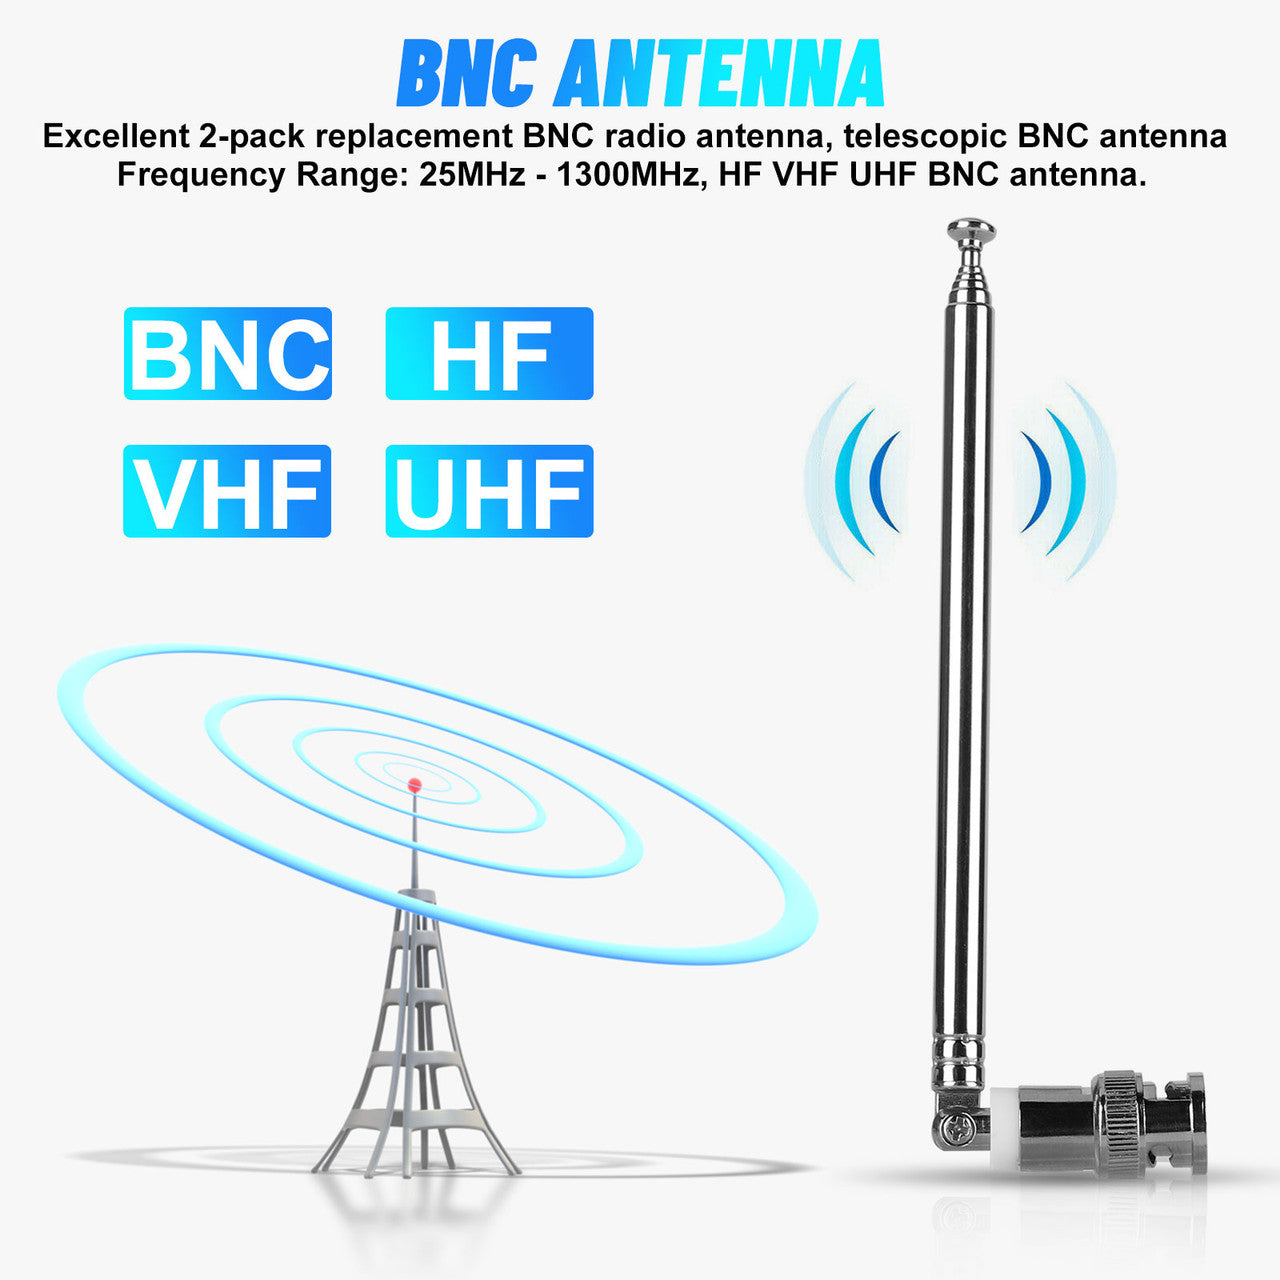 2x Replacement Telescopic BNC Antenna Connector for Radio Scanner/VHF/UHF/AM/FM